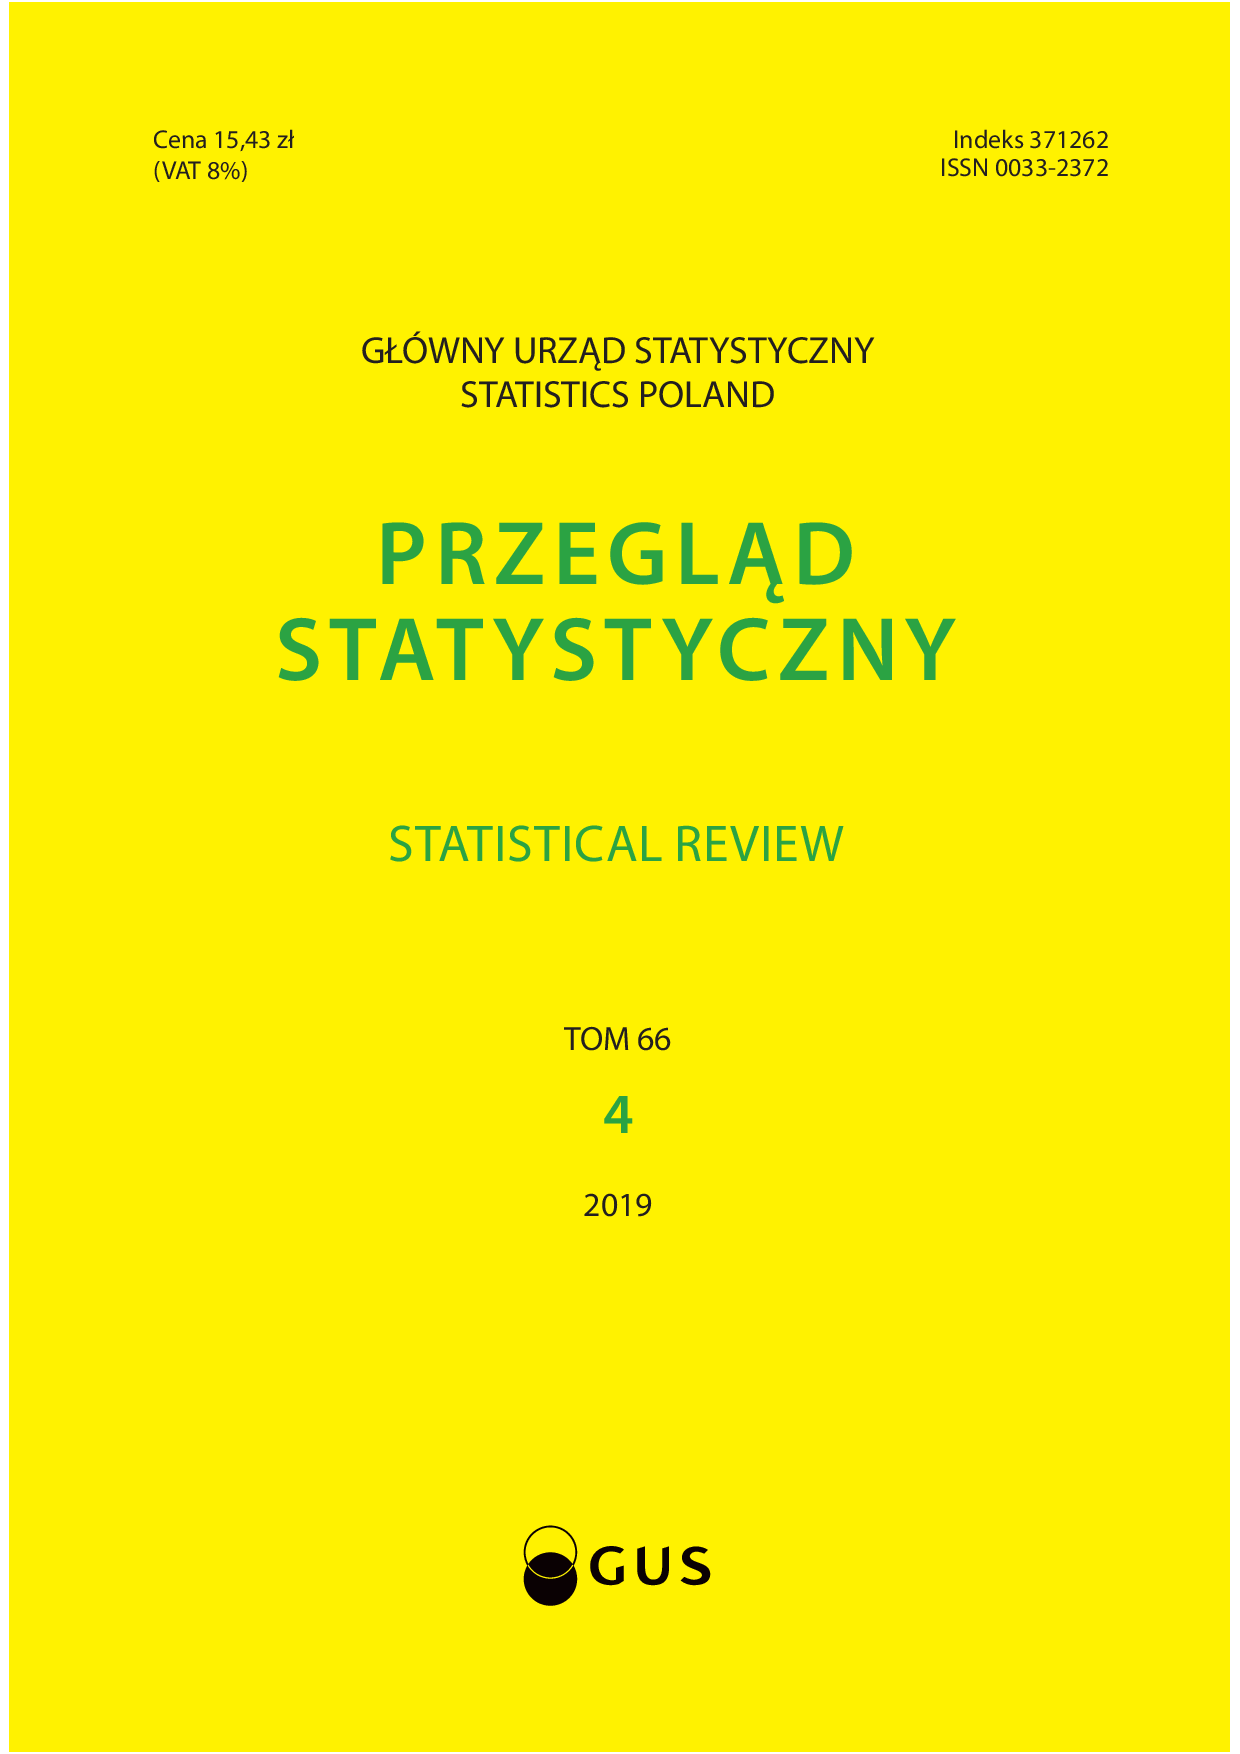 The birth of official statistics in Poland